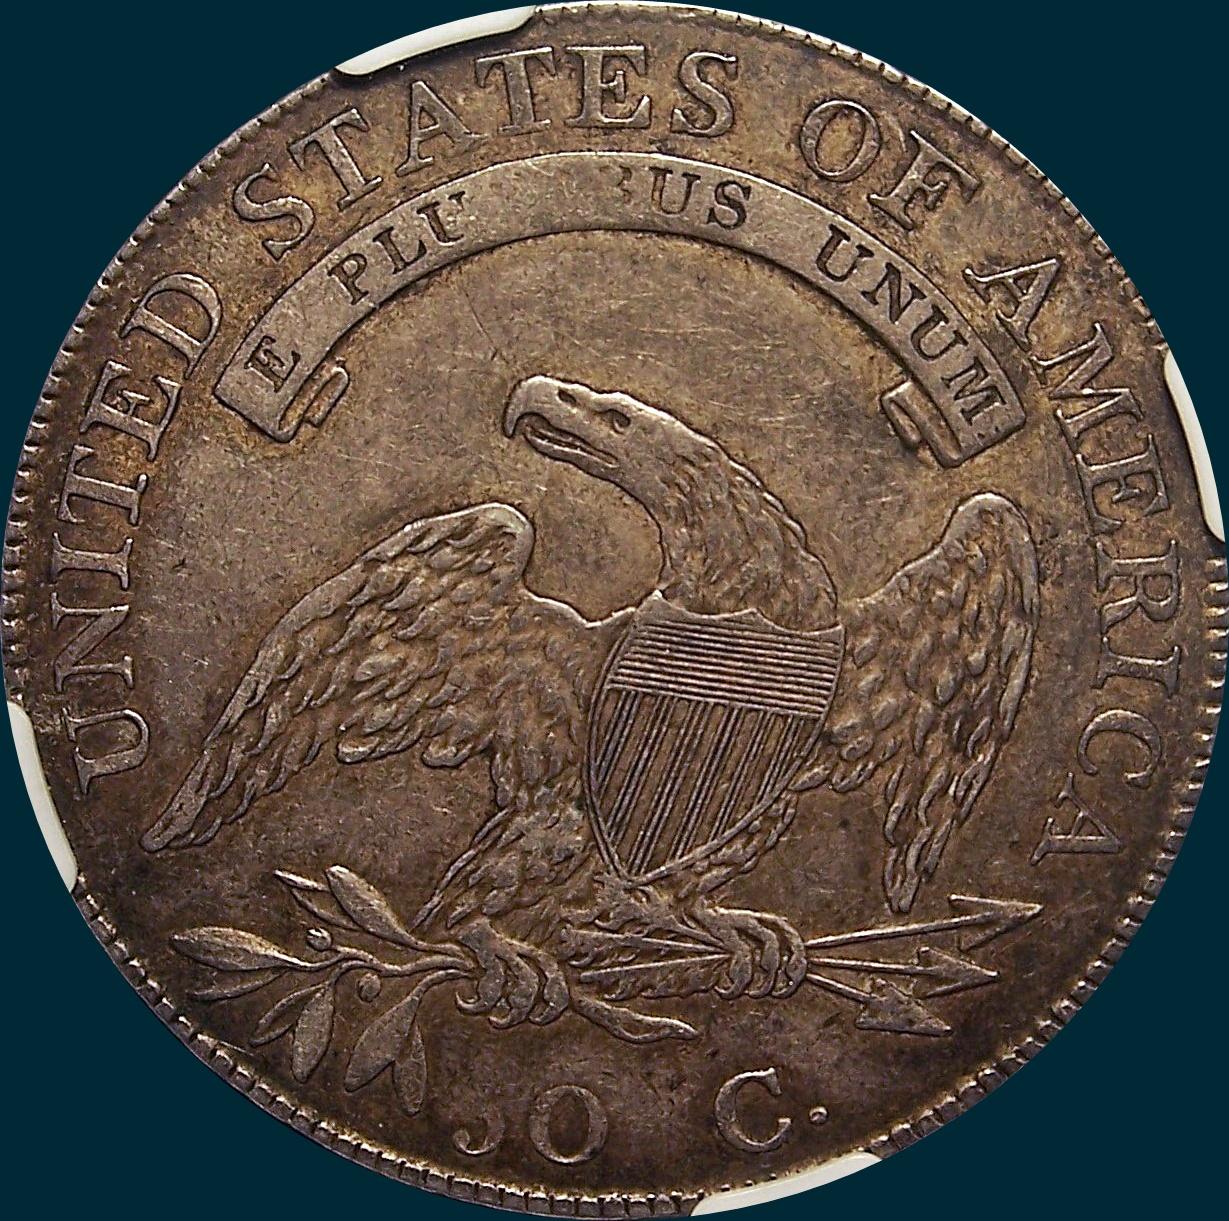 1807, O-114, Large Letters, Capped Bust, Half Dollar